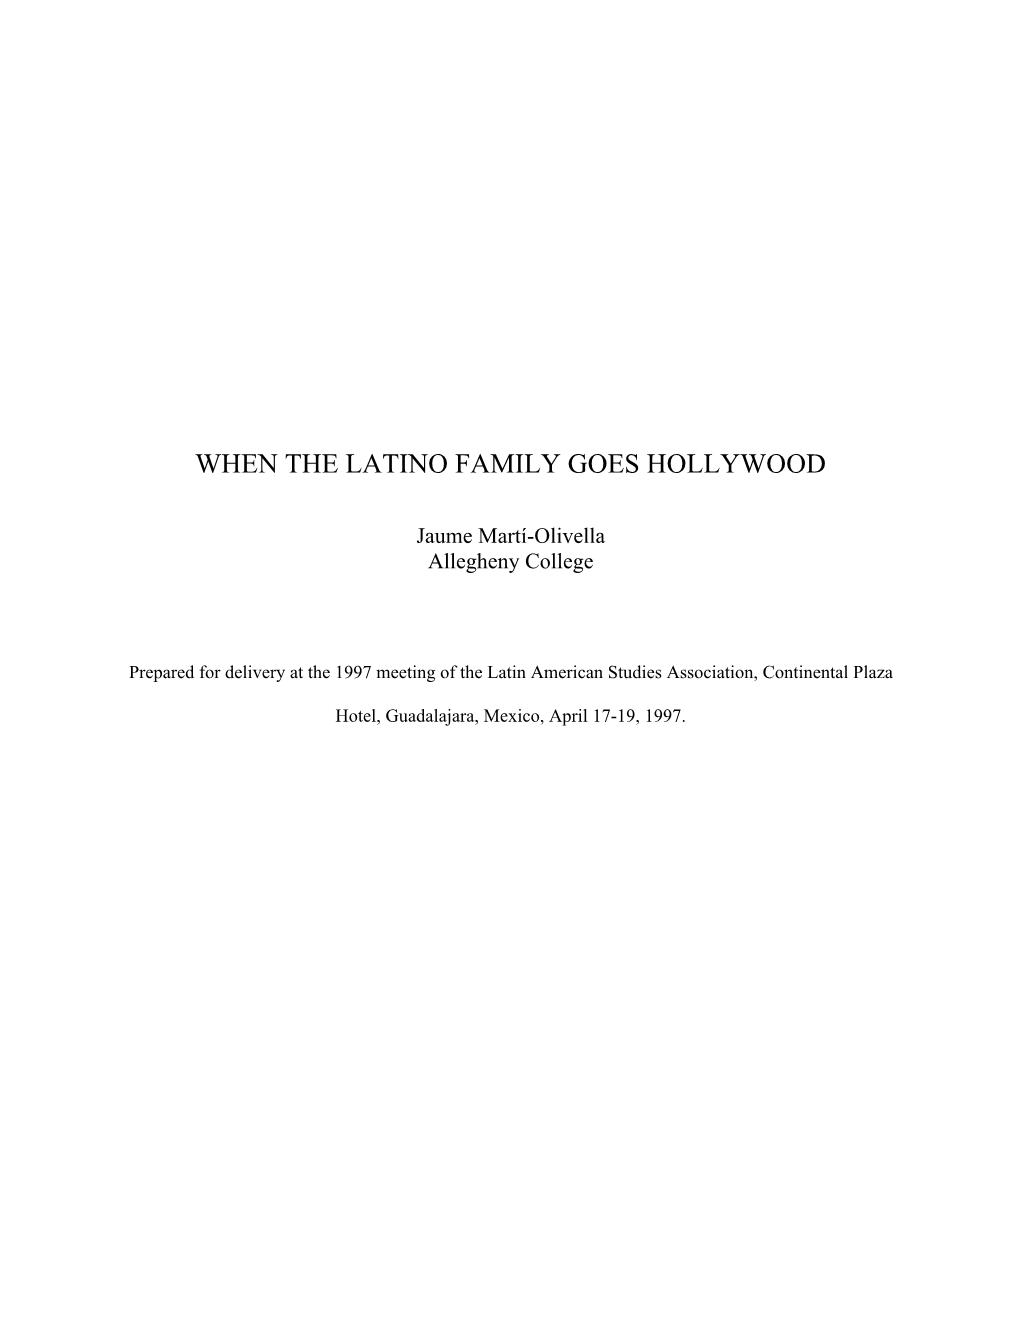 When the Latino Family Goes Hollywood